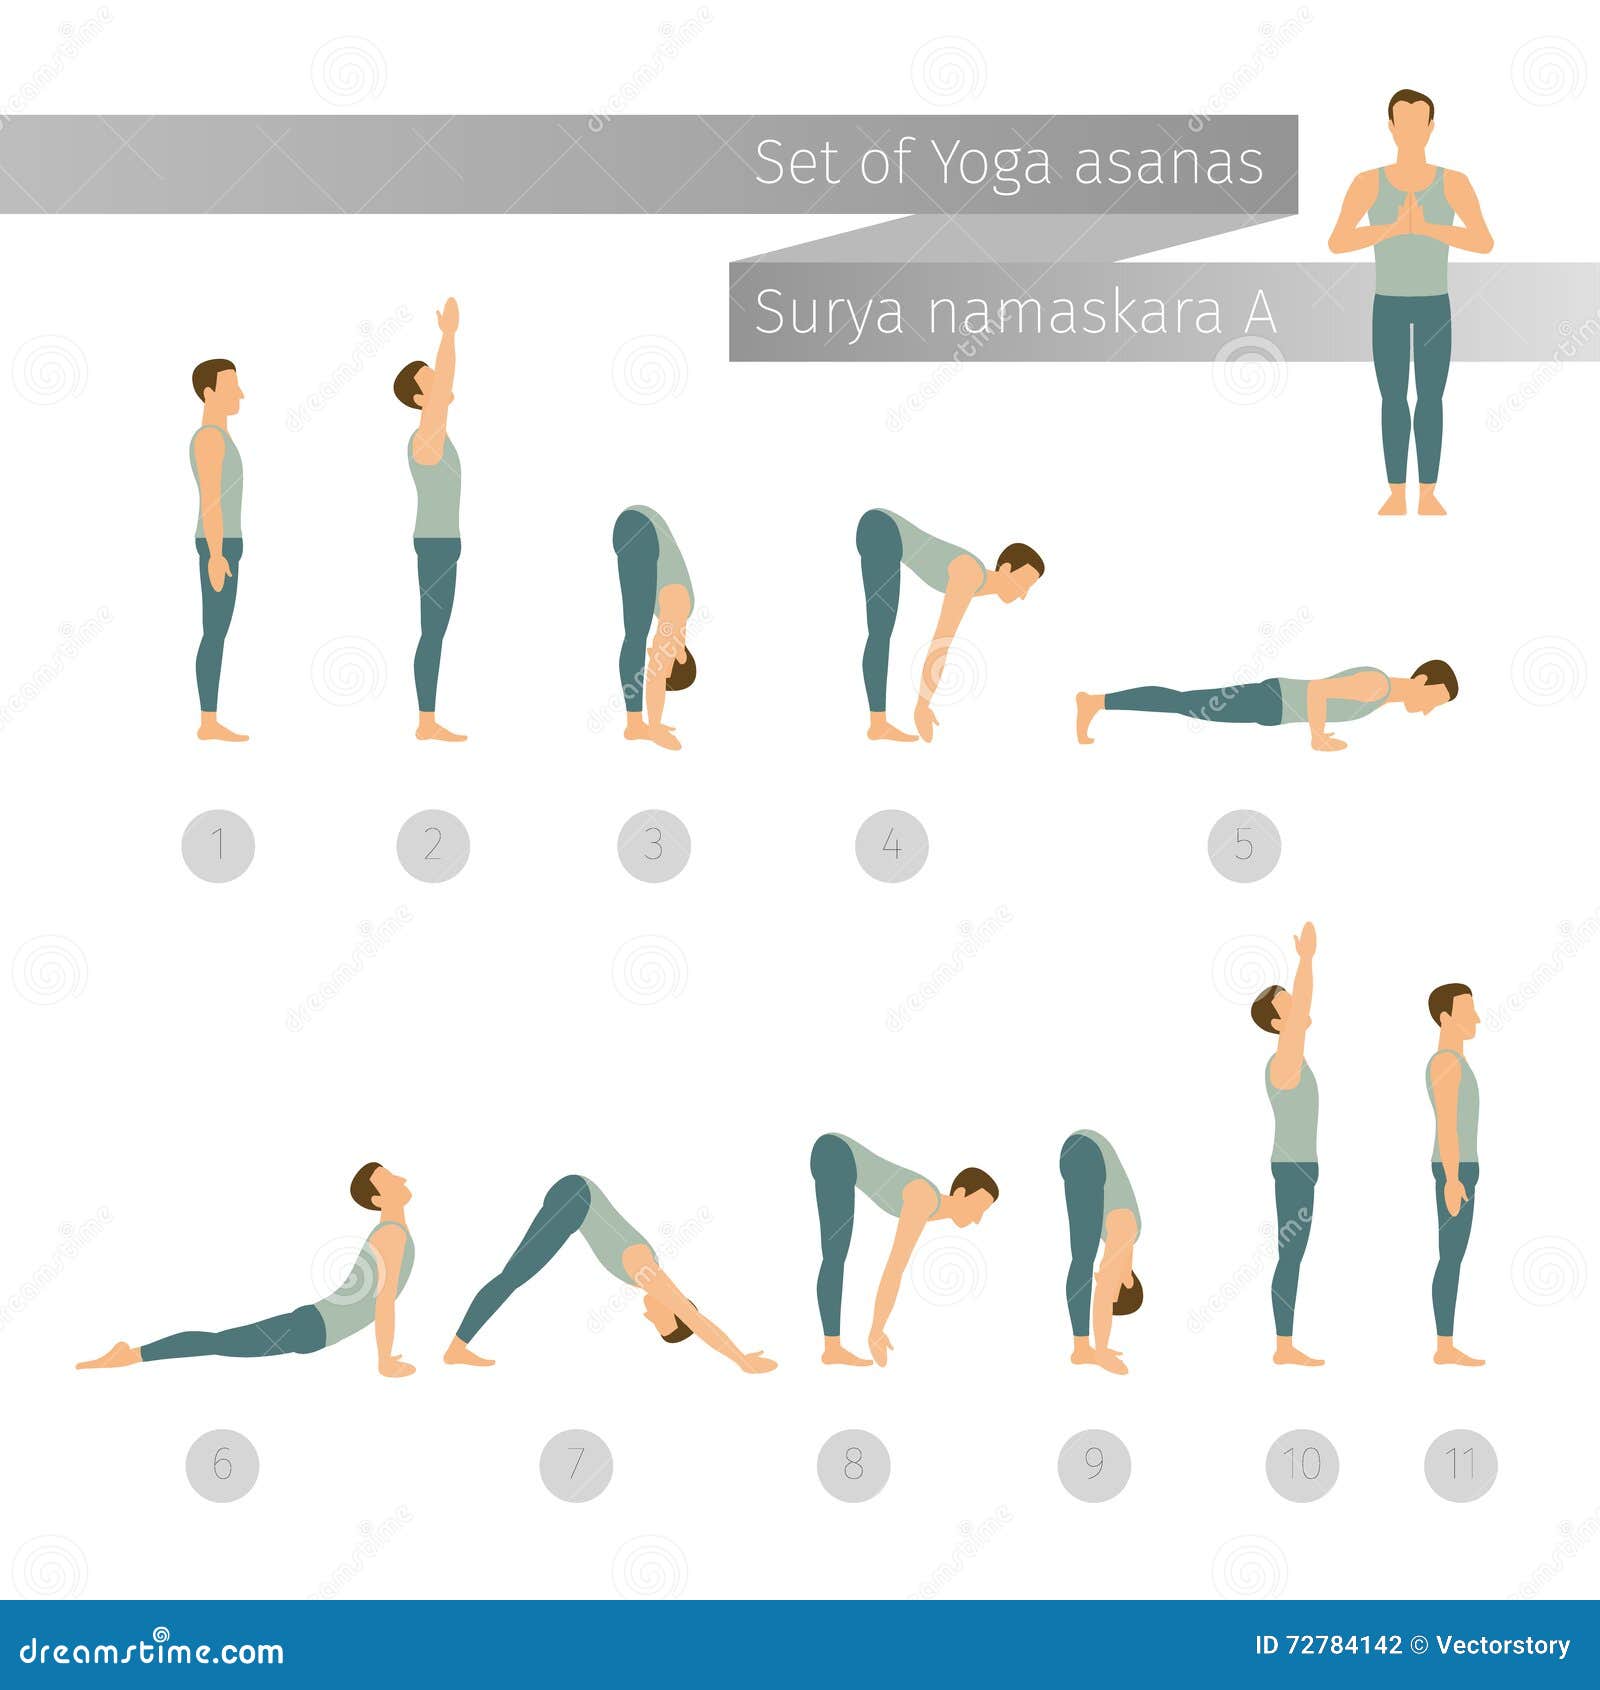 Q&A: Can I Do Sun Salutations in My Evening Yoga Practice?